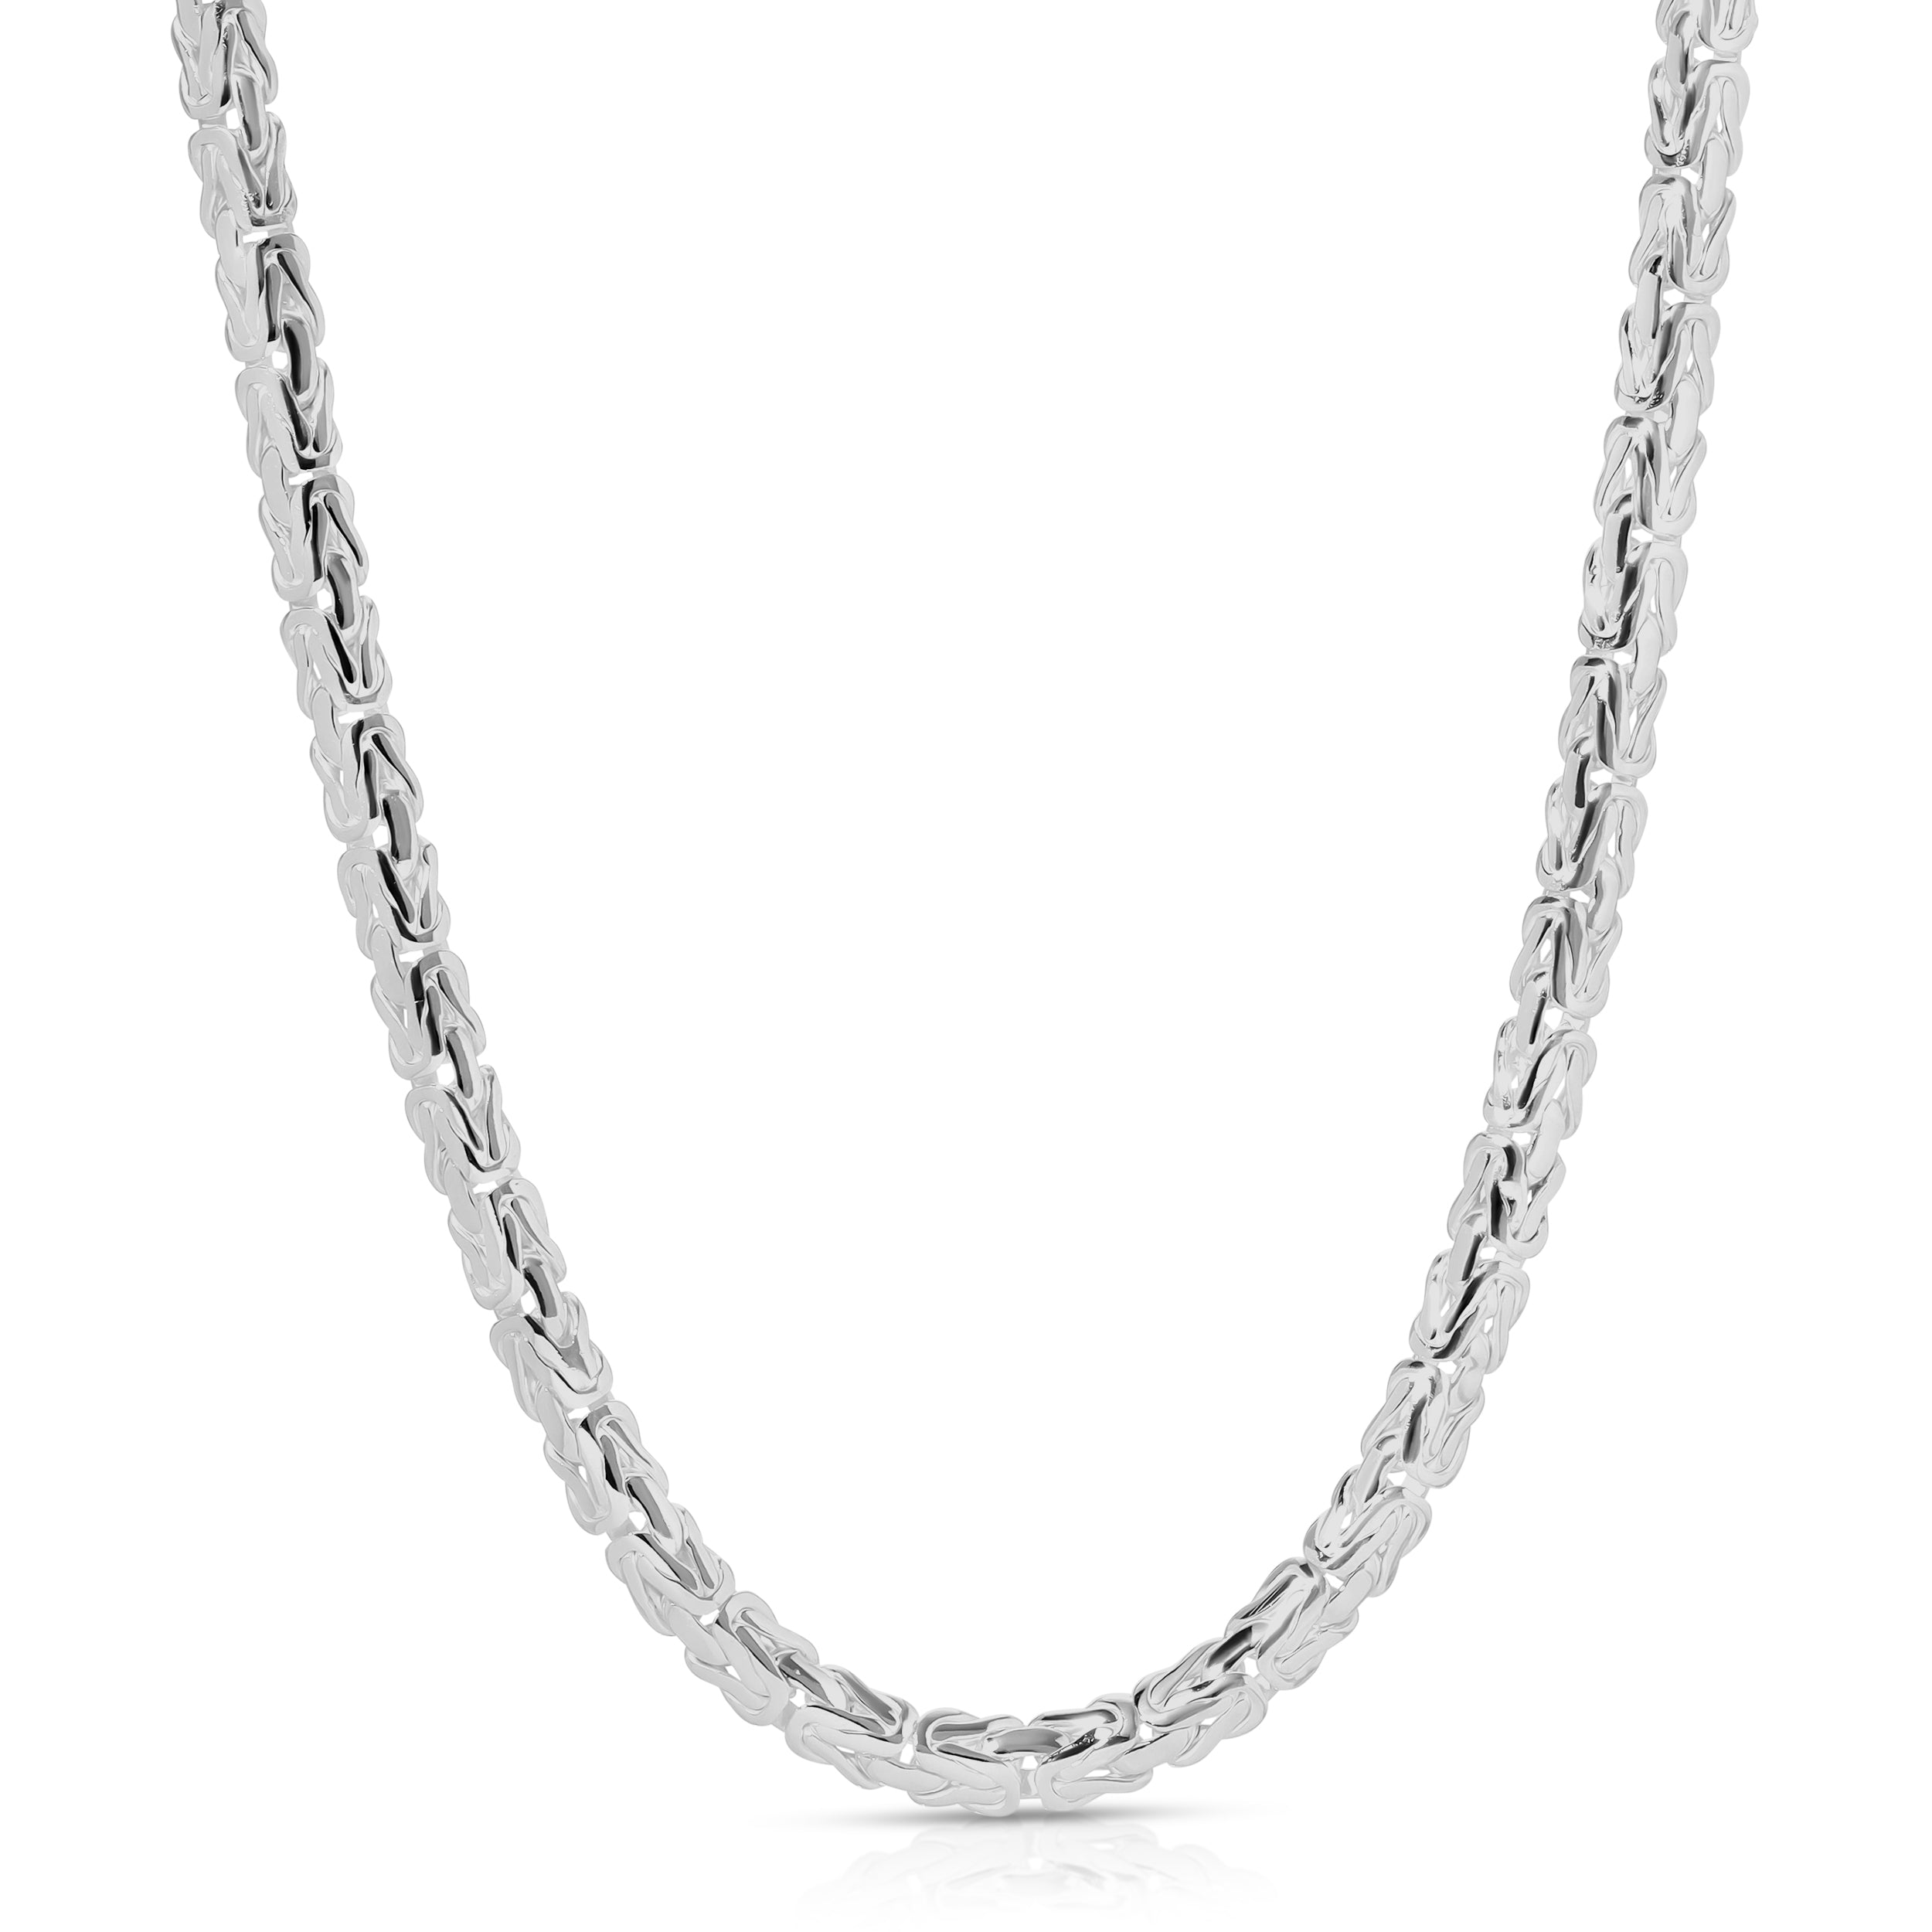 5mm Oval Byzantine Chain sterling silver 925